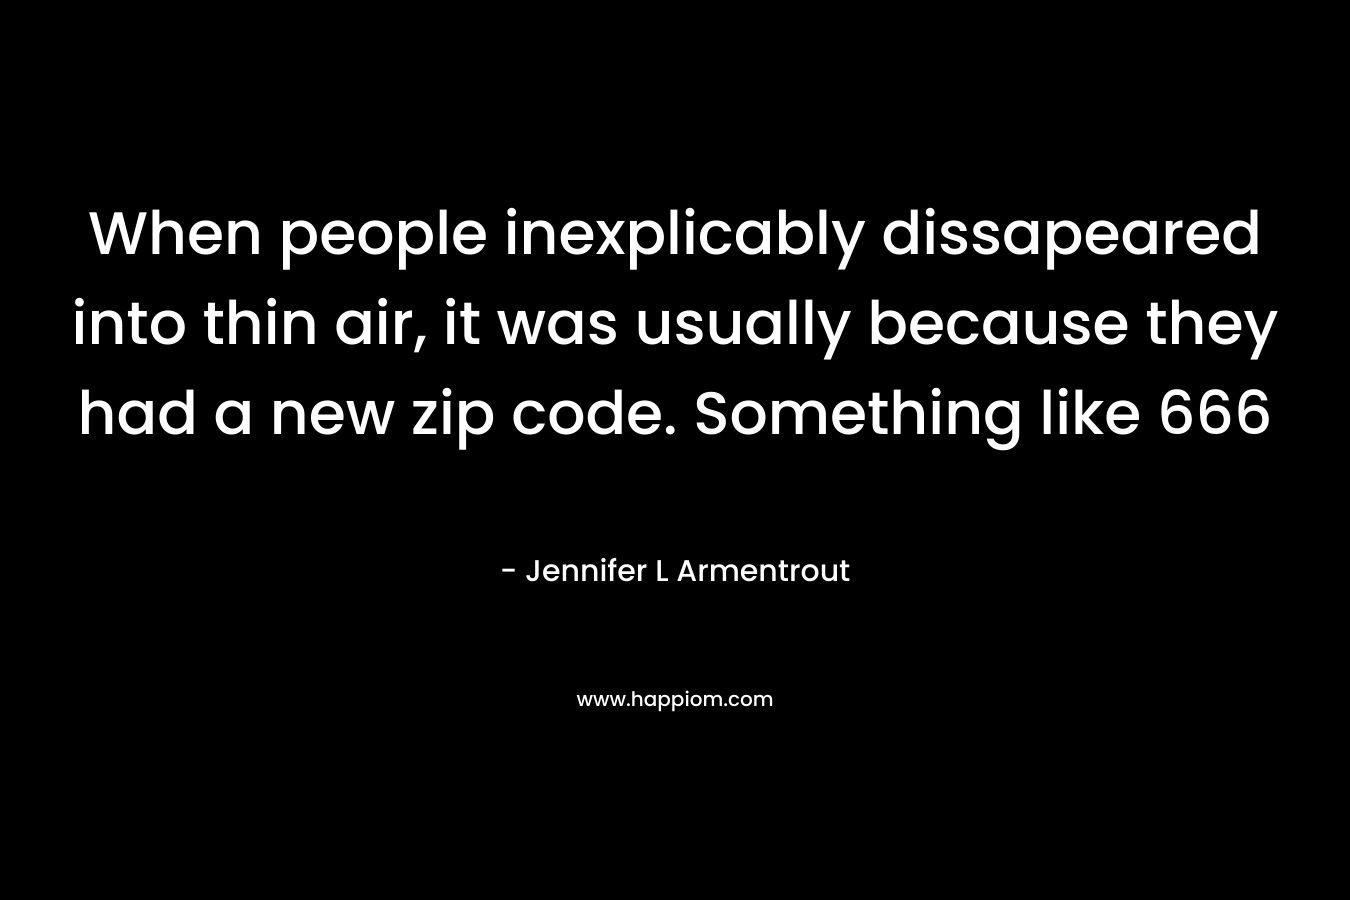 When people inexplicably dissapeared into thin air, it was usually because they had a new zip code. Something like 666 – Jennifer L Armentrout